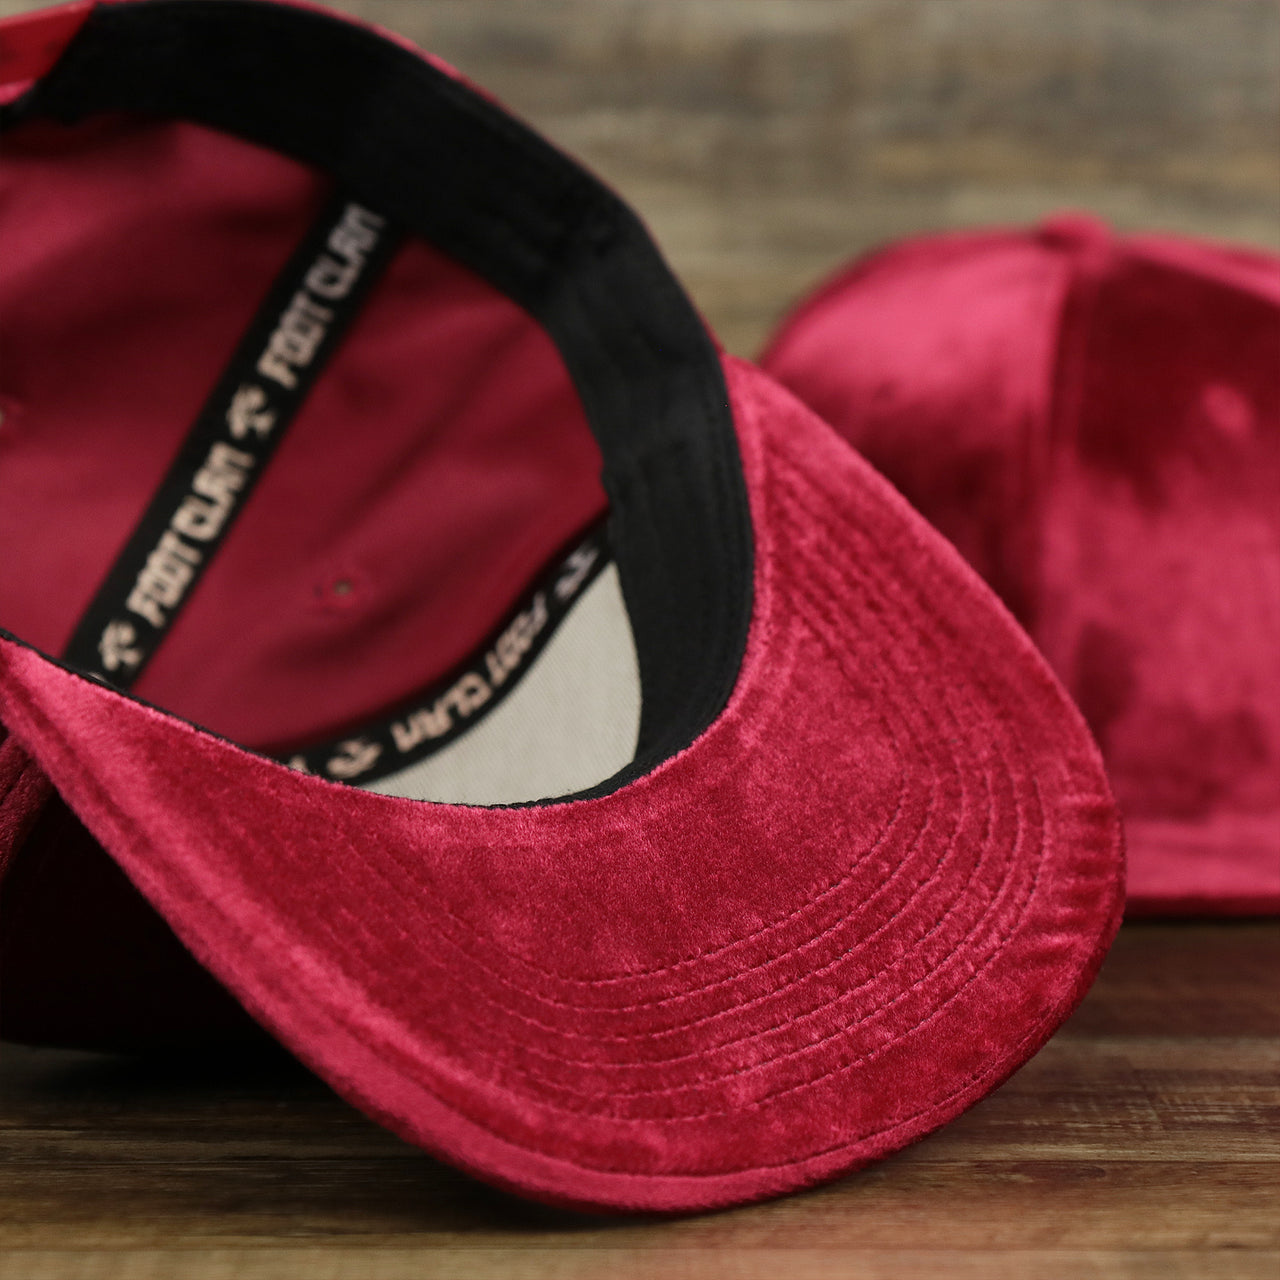 The undervisor on the Velour Blank Ox Blood Snapback Cap | Dark Red Snap Cap